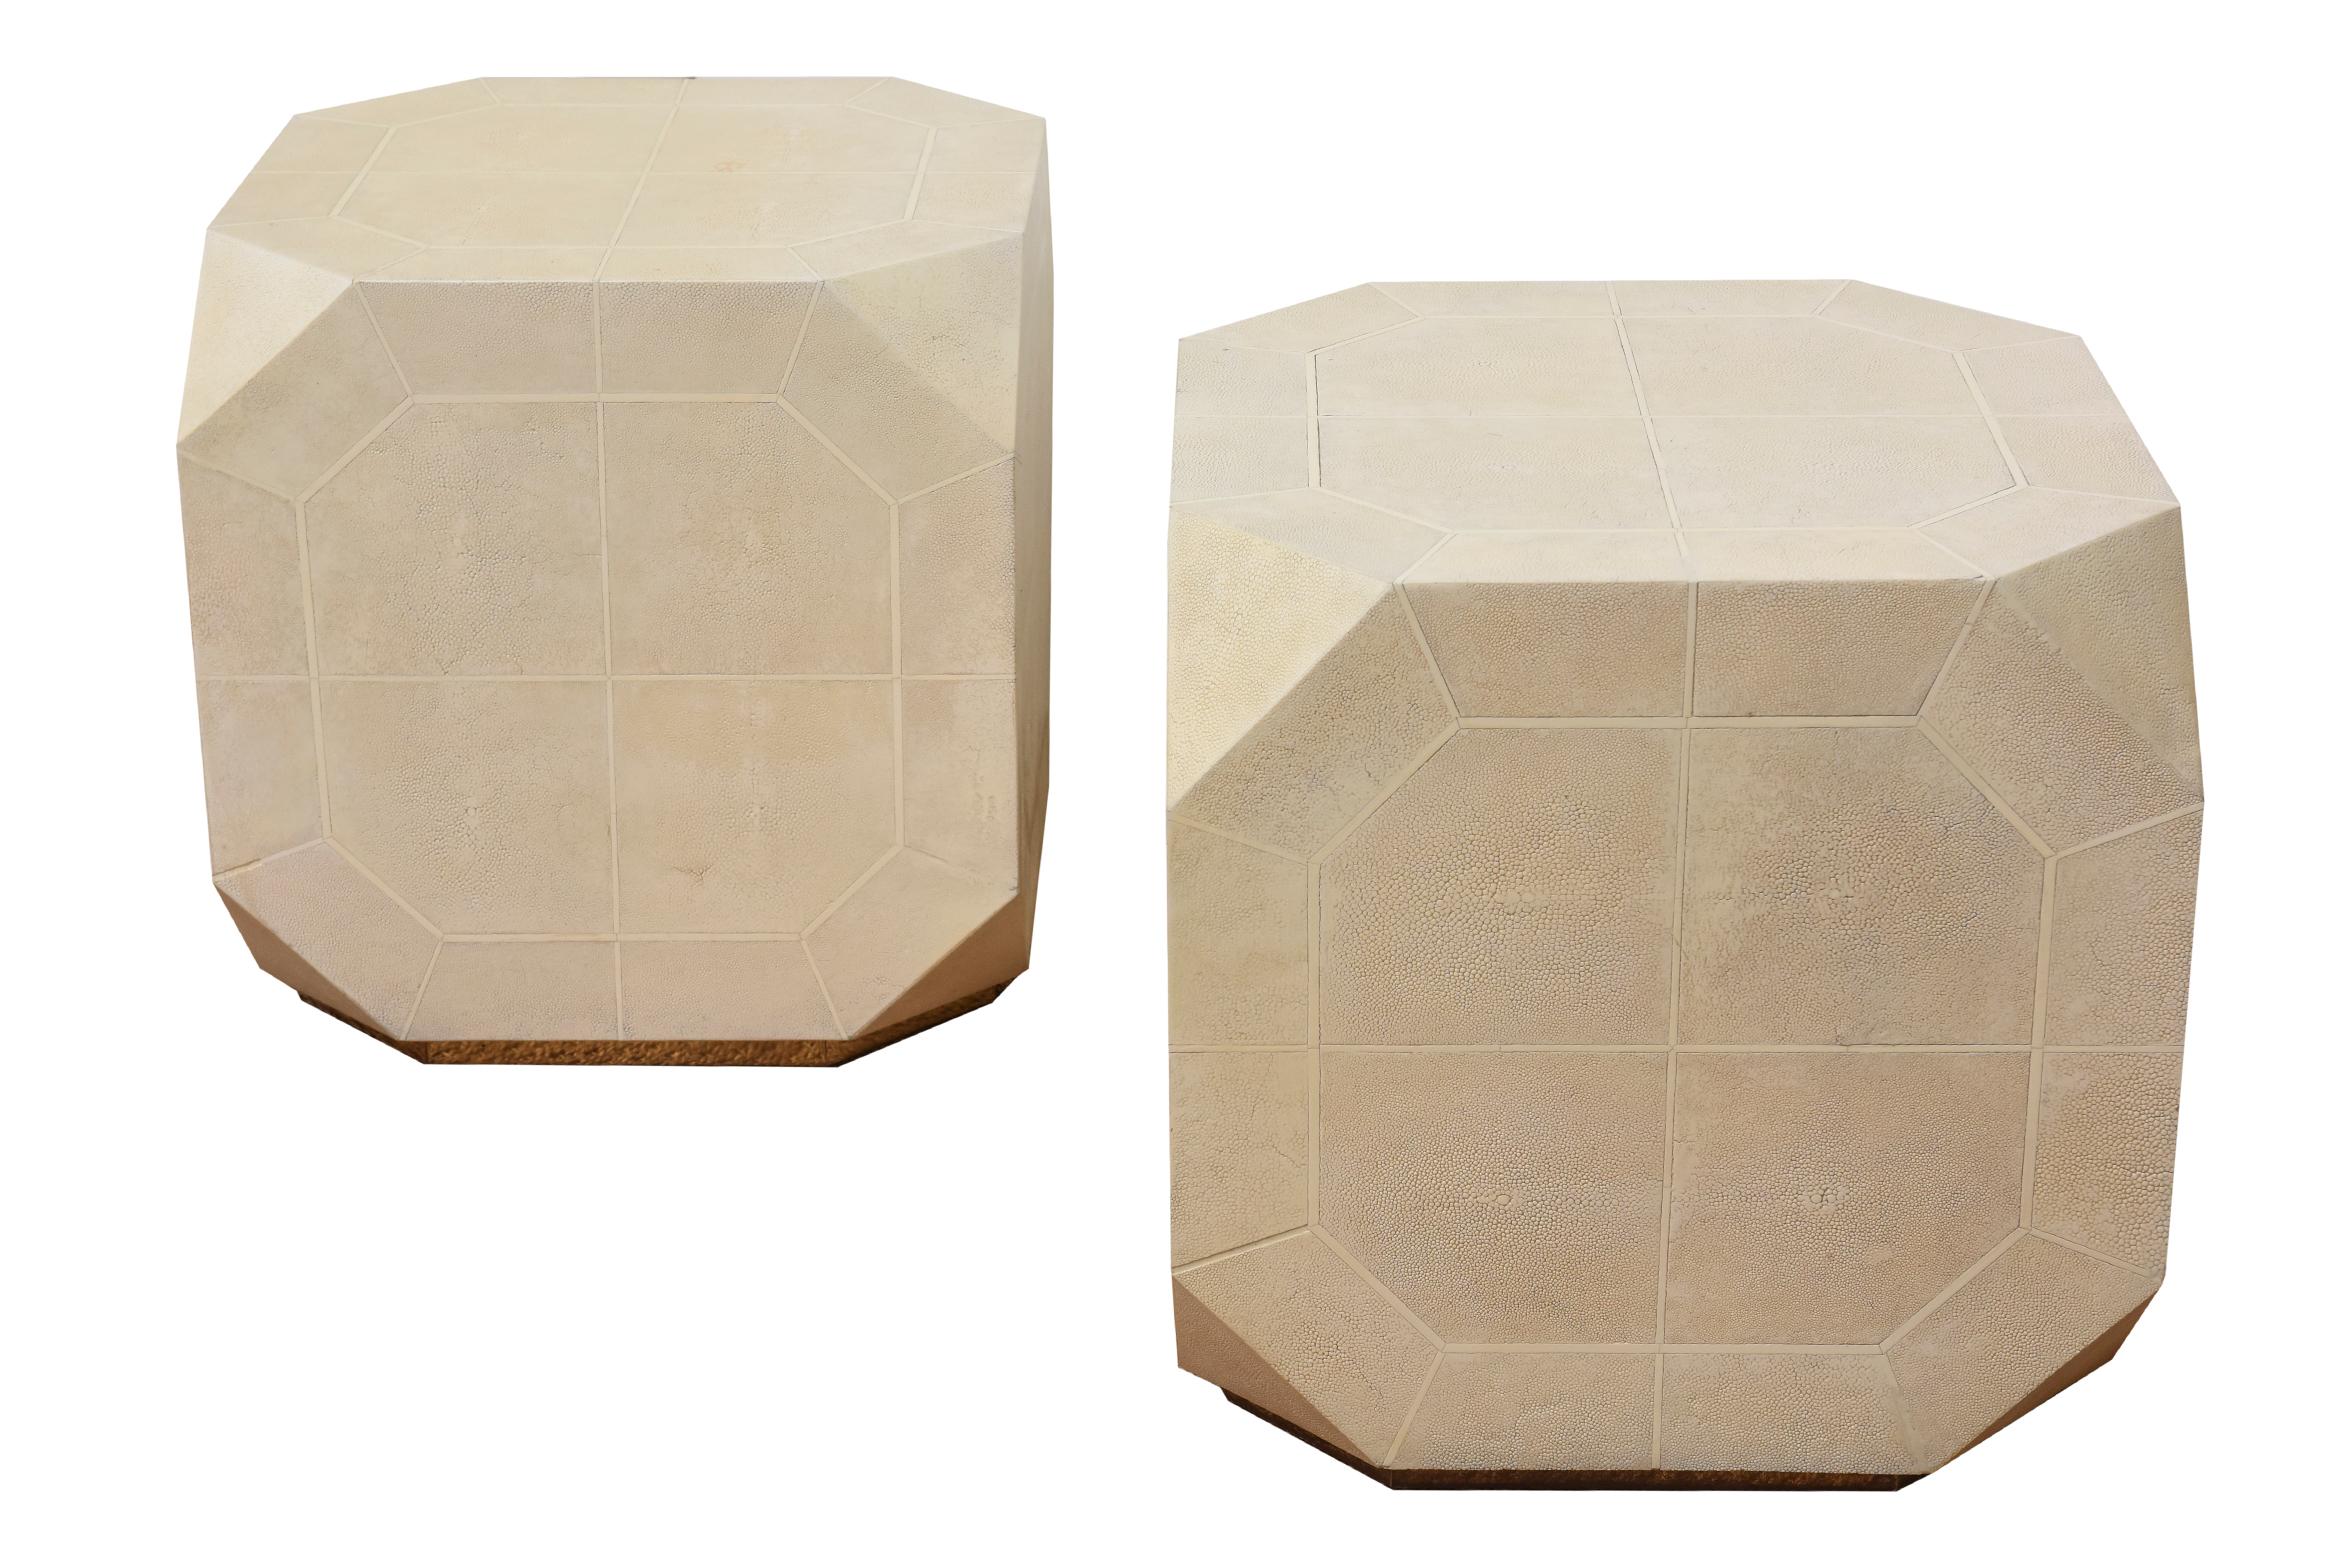 Organic Modern Ron Seff Cream and Off White Shagreen and Bone Inlaid Rare Side Tables Pair For Sale